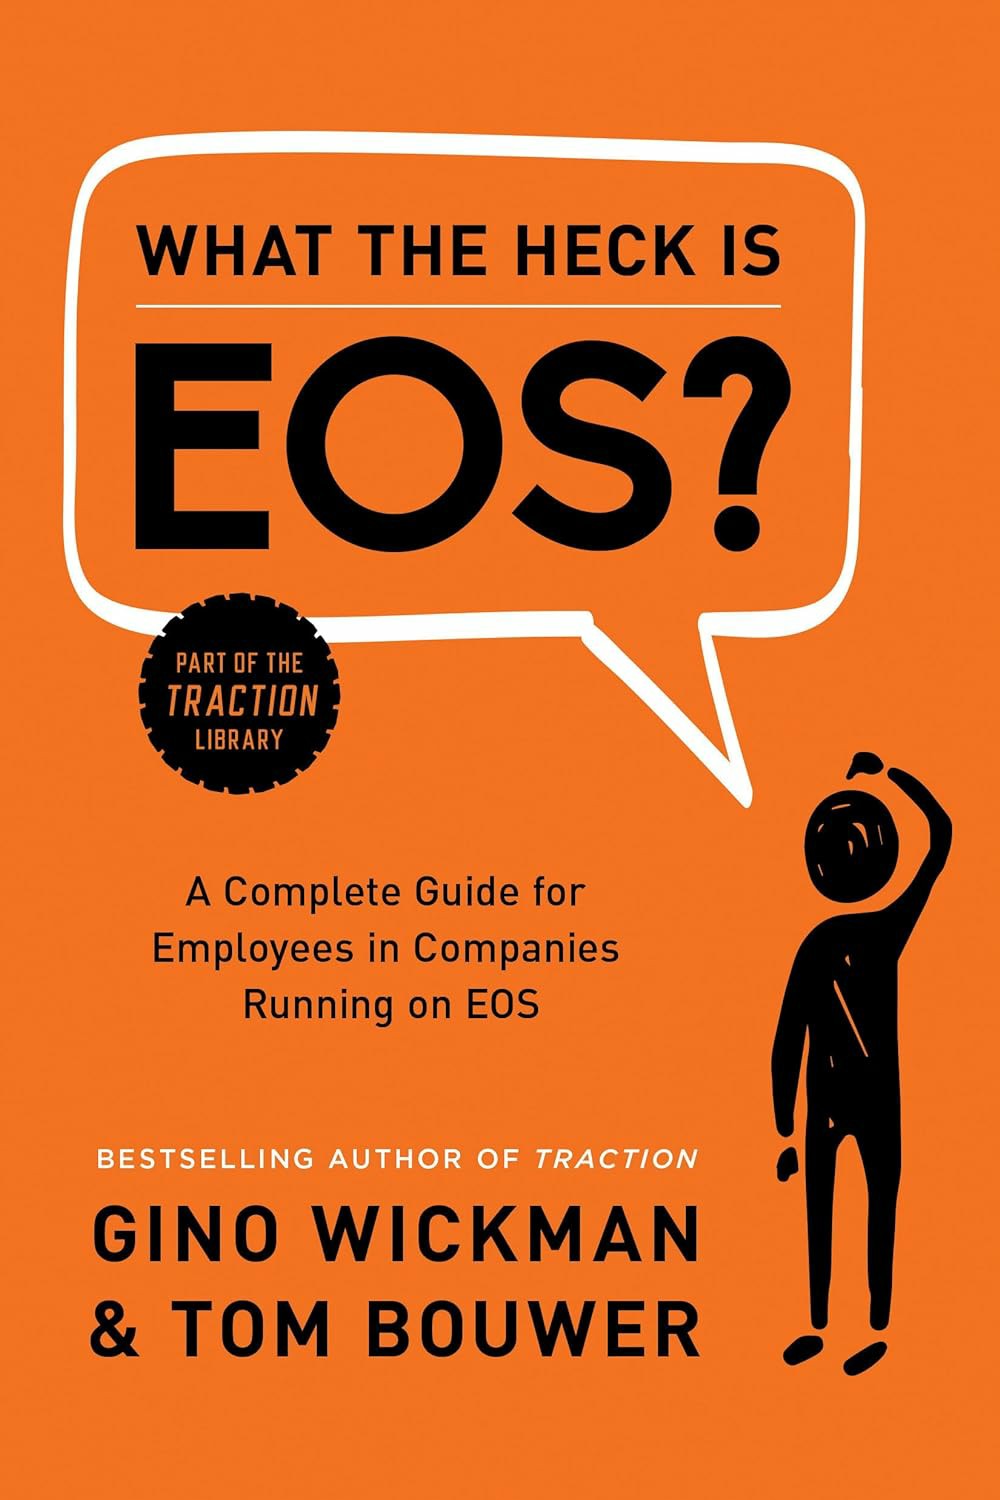 Gino Wickman _ Tom Bouwer - What the Heck Is EOS